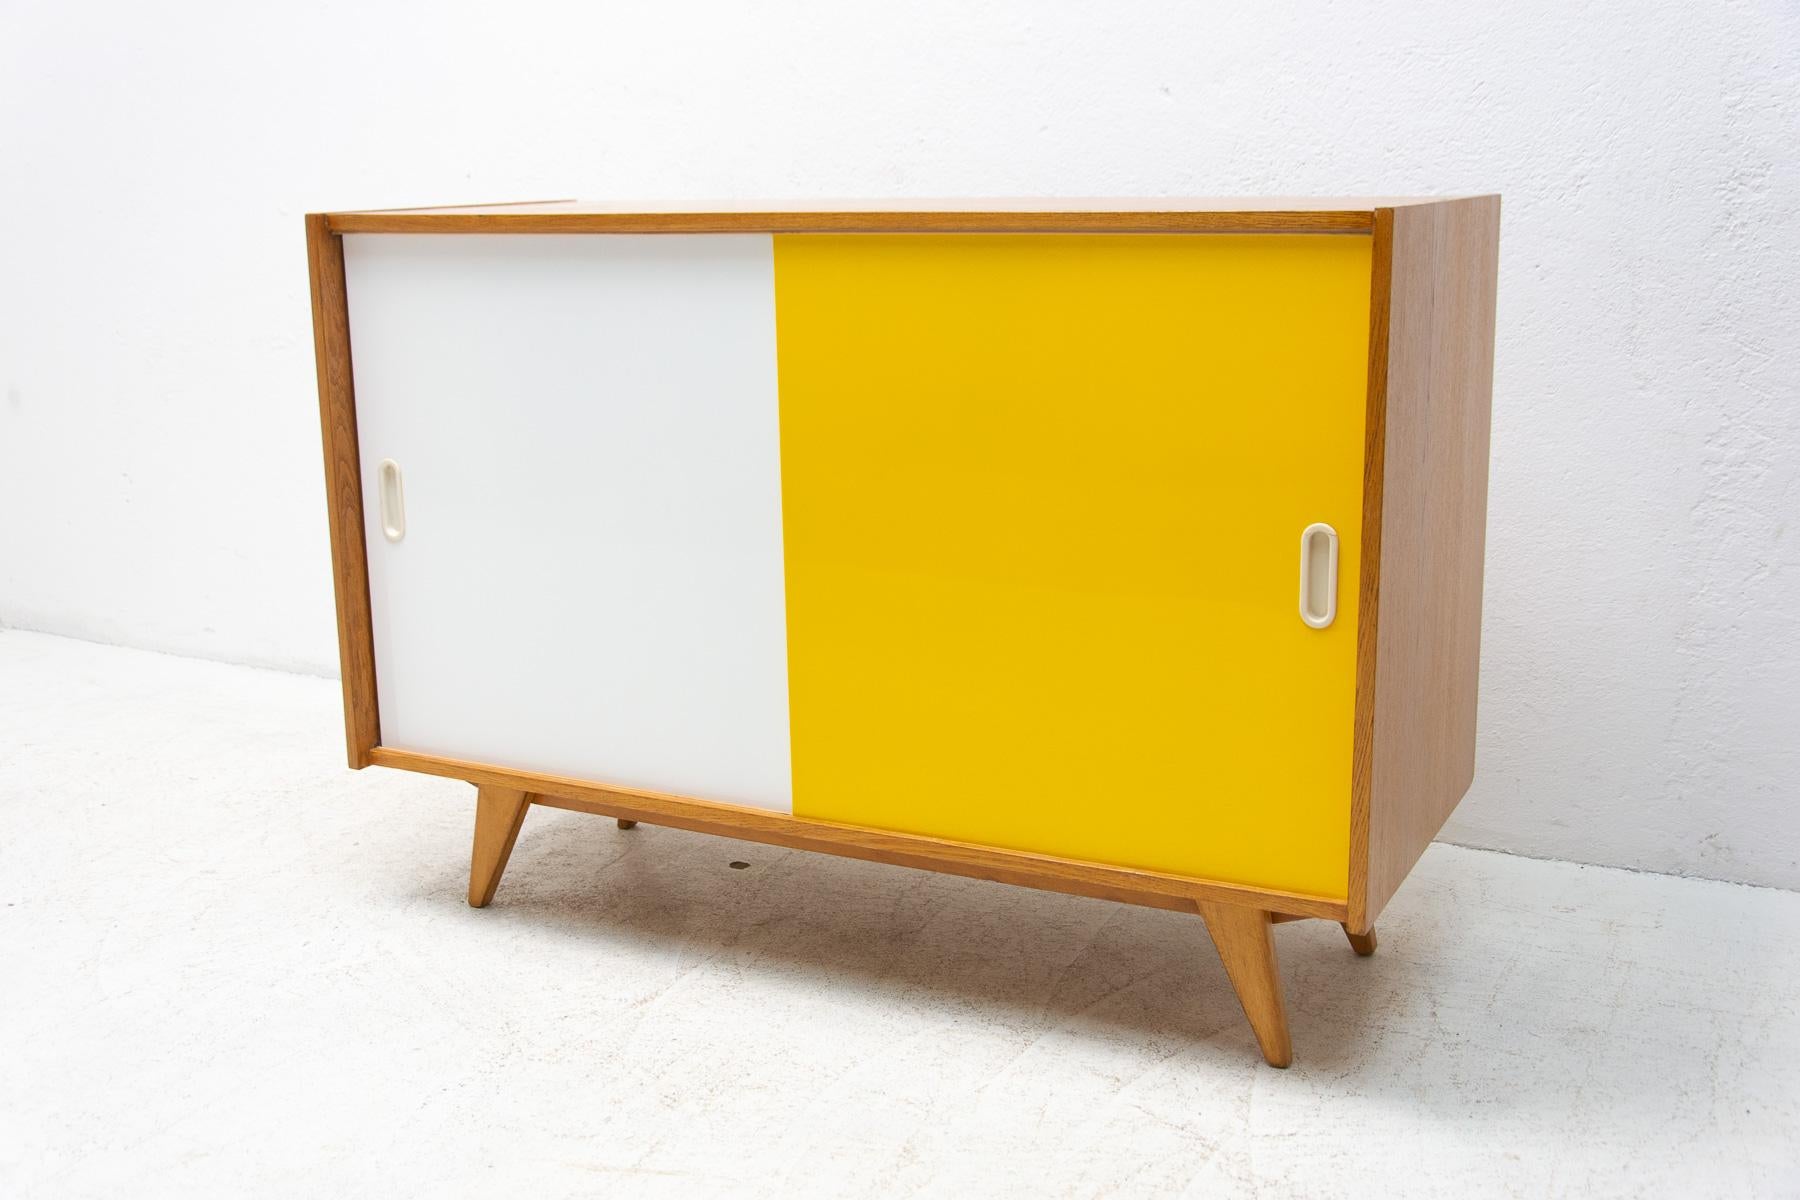 Mid-century sideboard-cabinet with sliding doors, catalogue No. U-452, designed by Jiri Jiroutek. It's made of beechwood, veneer, plywood and laminate. In excellent condition, fully refurbished.

The cabinet comes from the famous Universal series